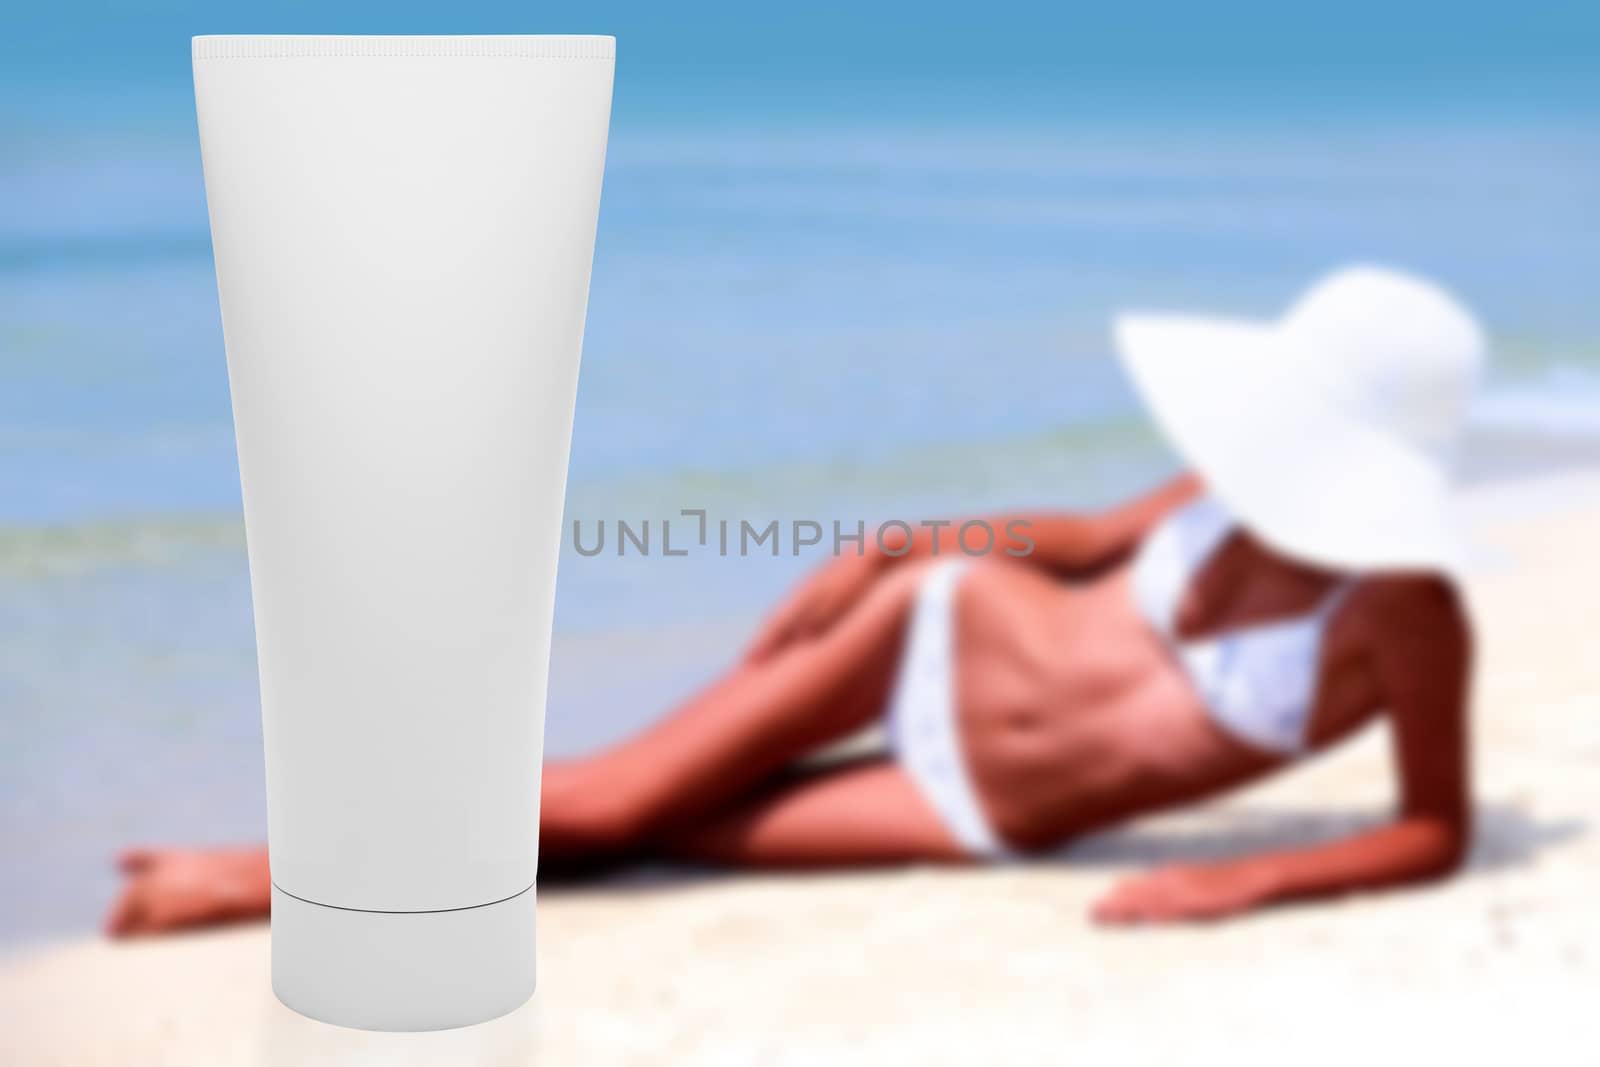 Tube of sun lotion with slim tanned woman on a beach behind. Summer holidays